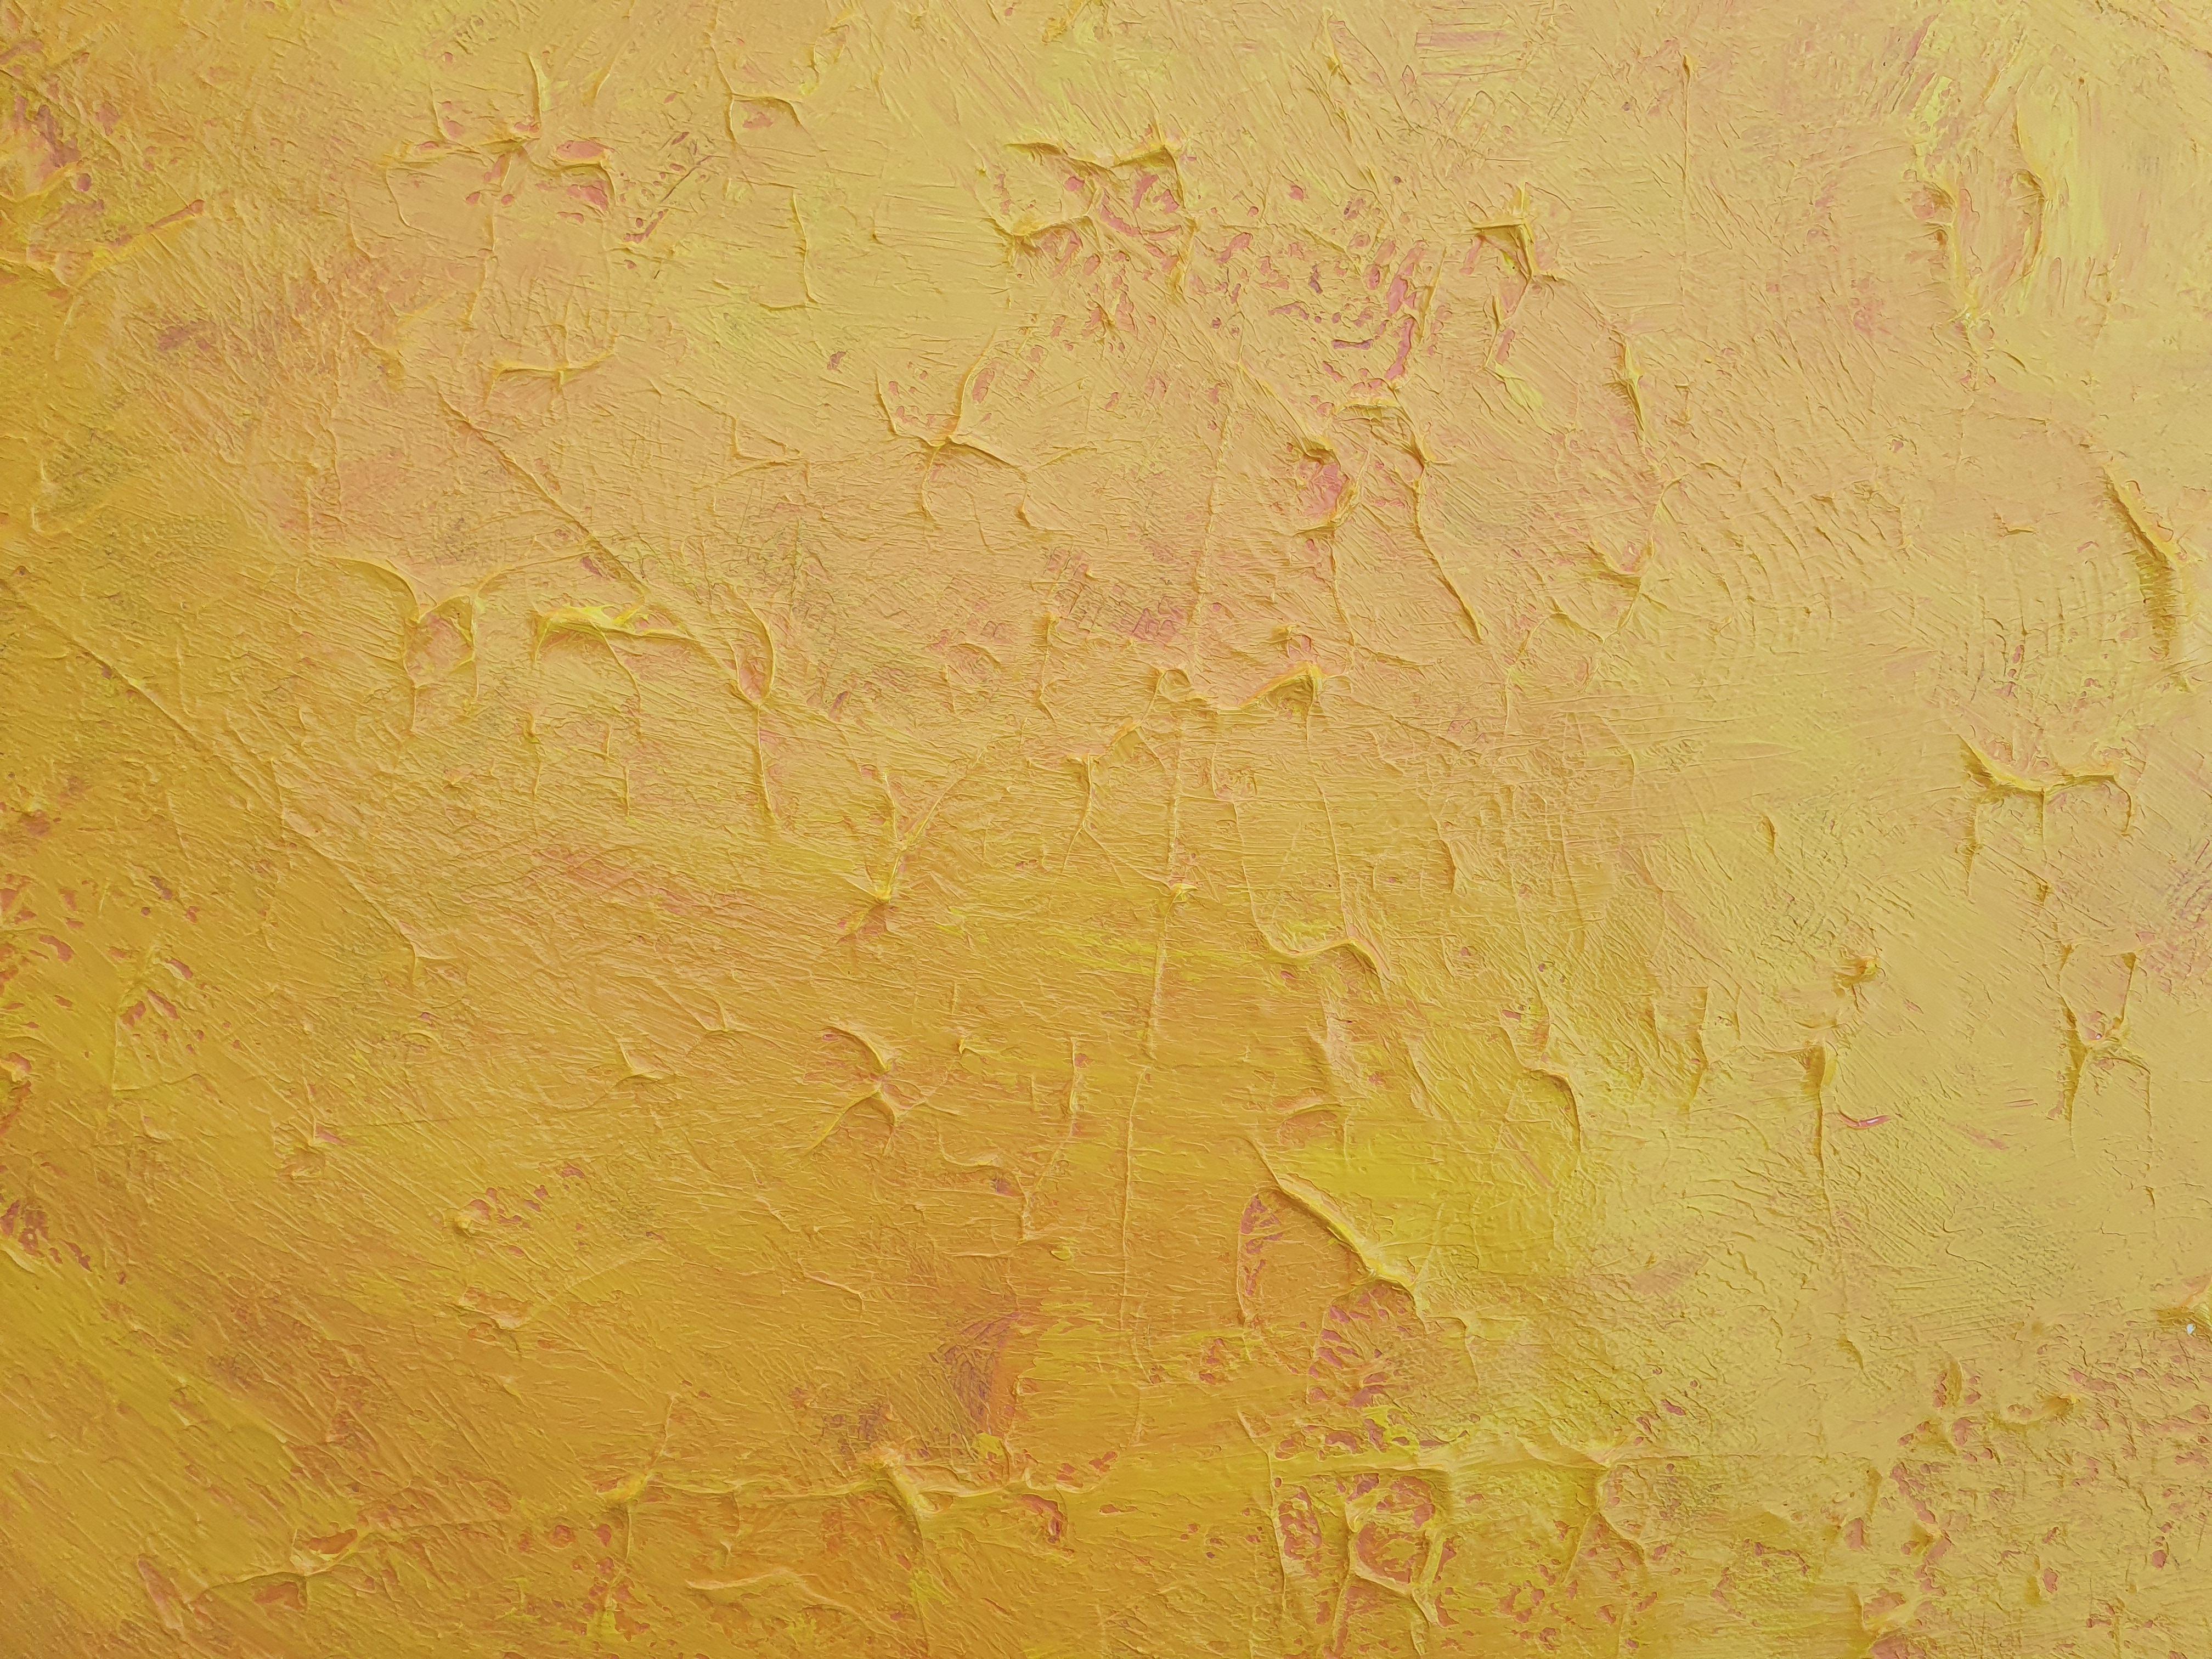 An original one-of-a-kind palette knife abstract painting with a heavy texture.    Minimalistic abstract with pulsing energy of the Sun. You can literally feel the heat from the painting.    Shades of yellow and orange.    Recognizable artist's